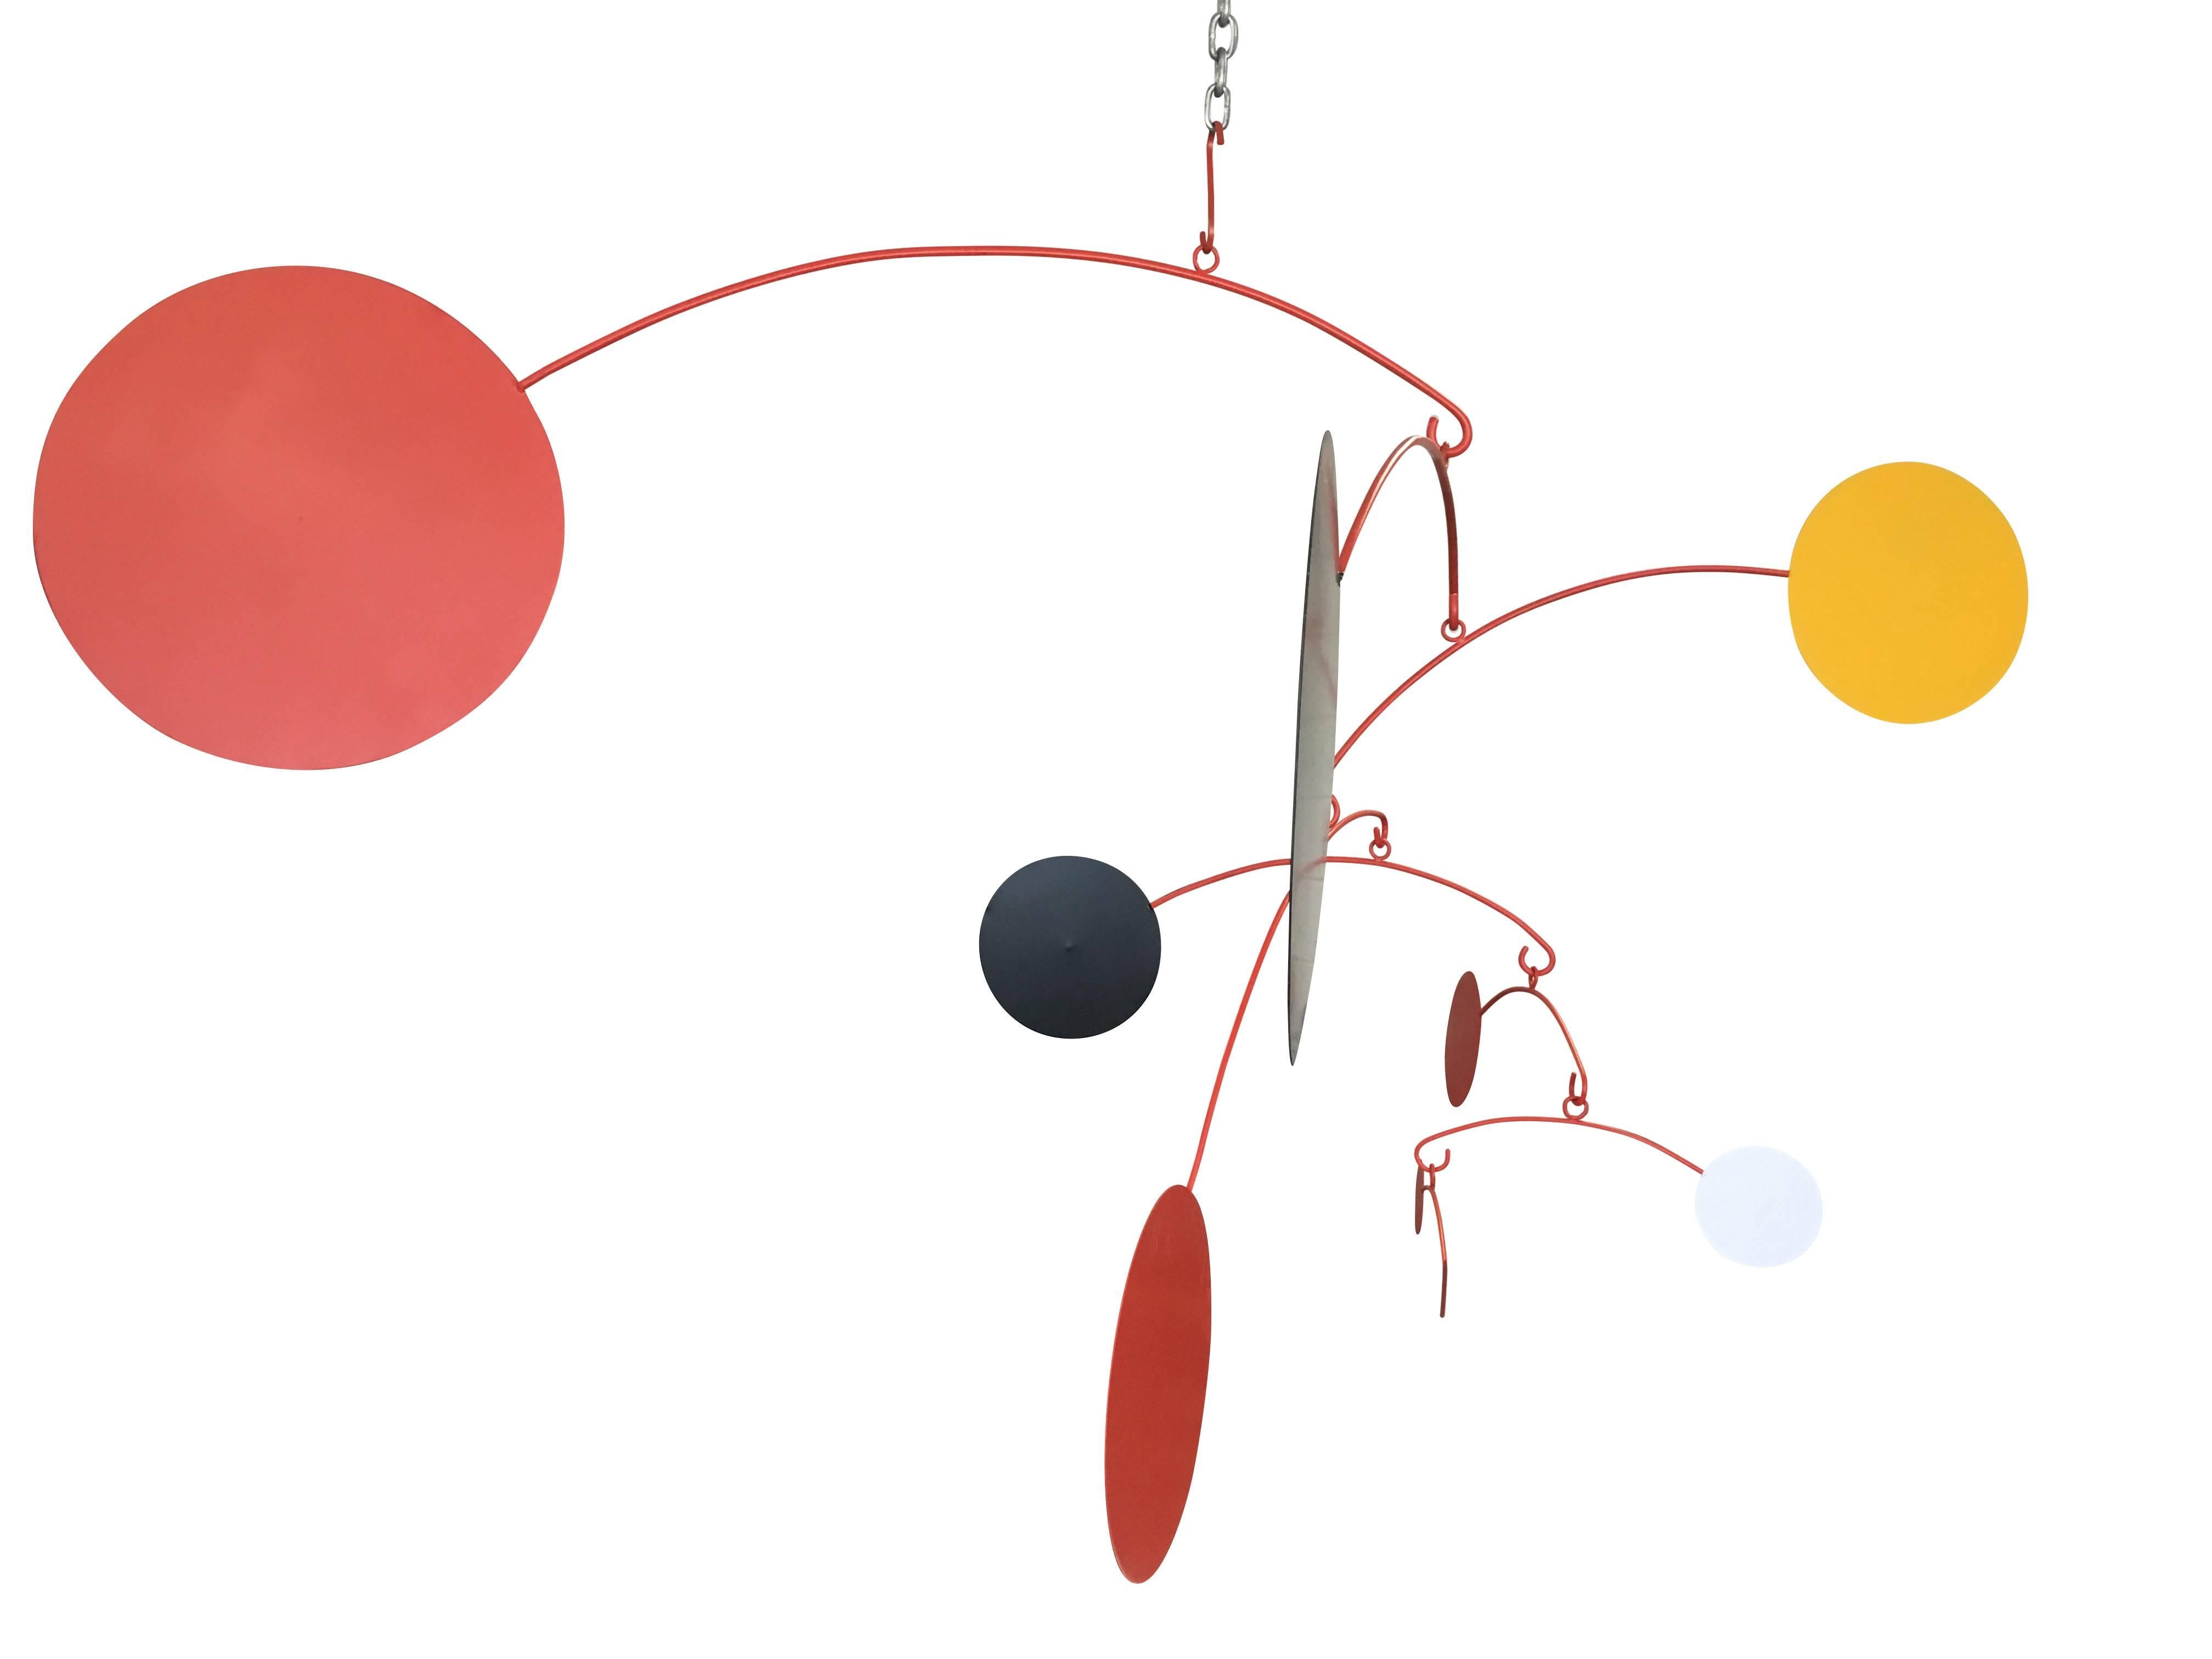 Stunning eight-arm Kinetic mobile in the manner of Alexander Calder. Eight interchangeable arms with vibrant orange, red, black, yellow and white spheres. The measurements of the mobile as shown is 64